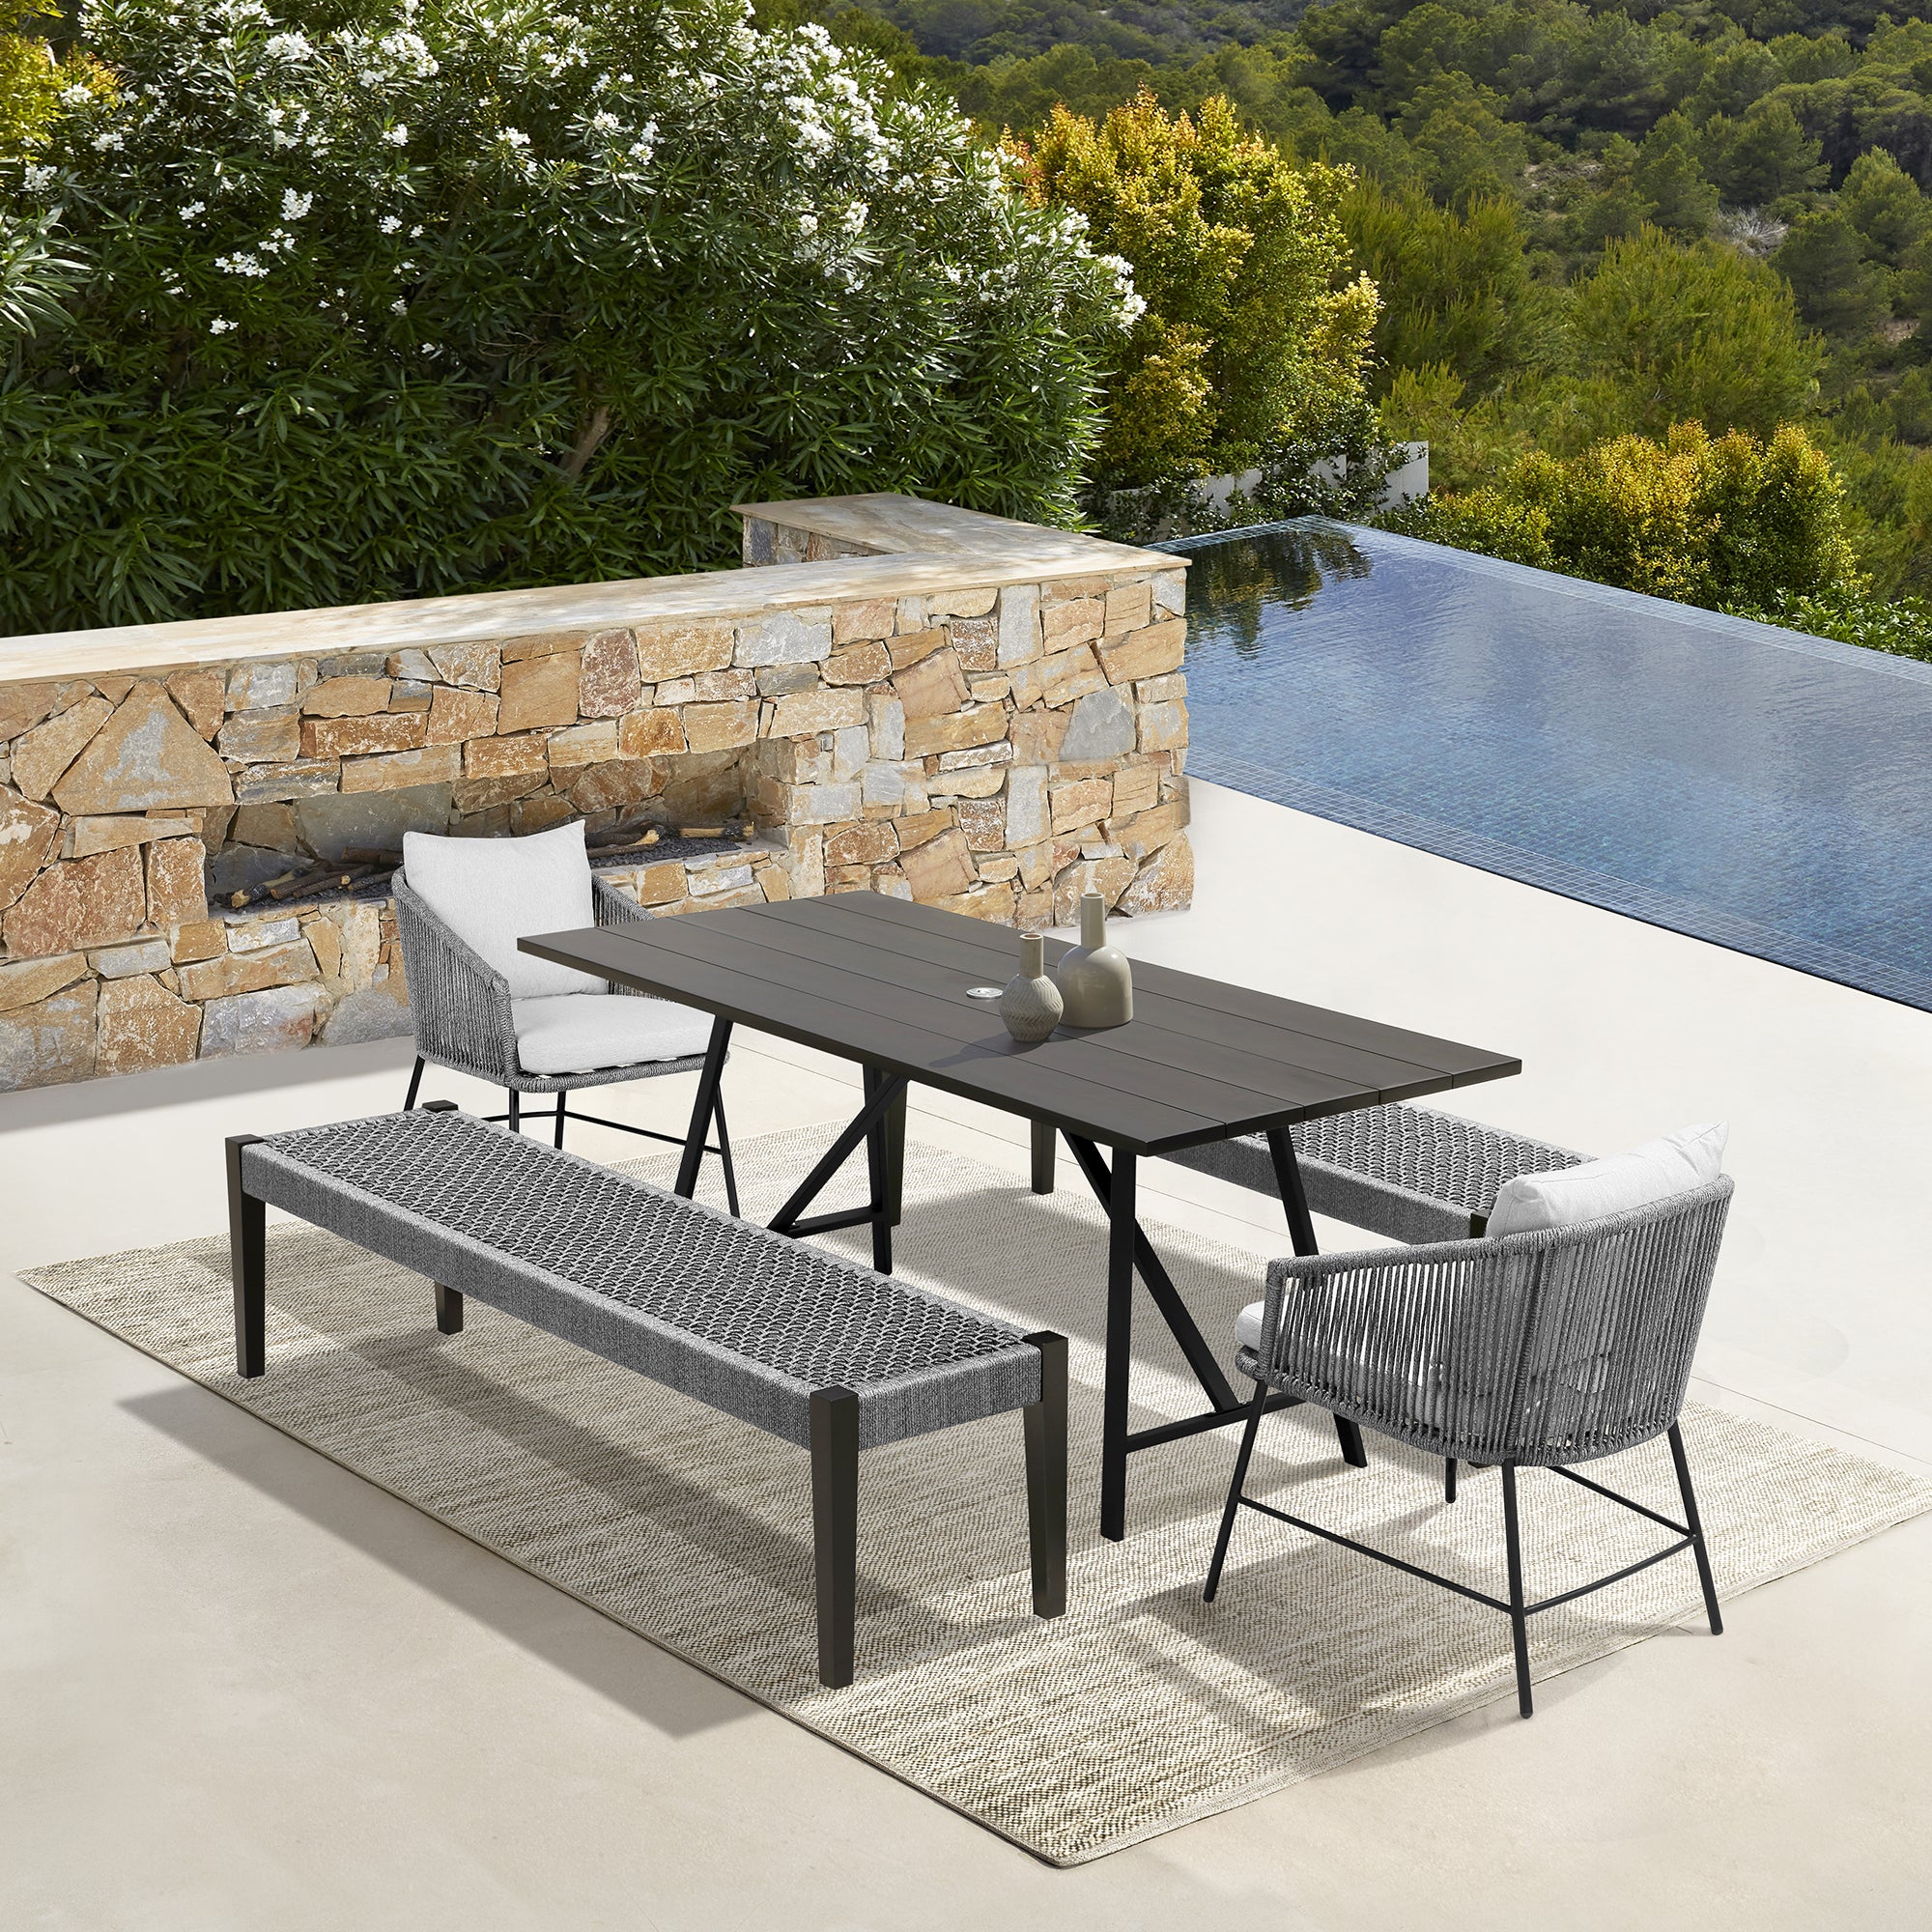 Armen Living - Koala Calica and Camino 5 Piece Outdoor Dining Set with Dark Eucalyptus Wood and Grey Rope and Cushions - 840254333796